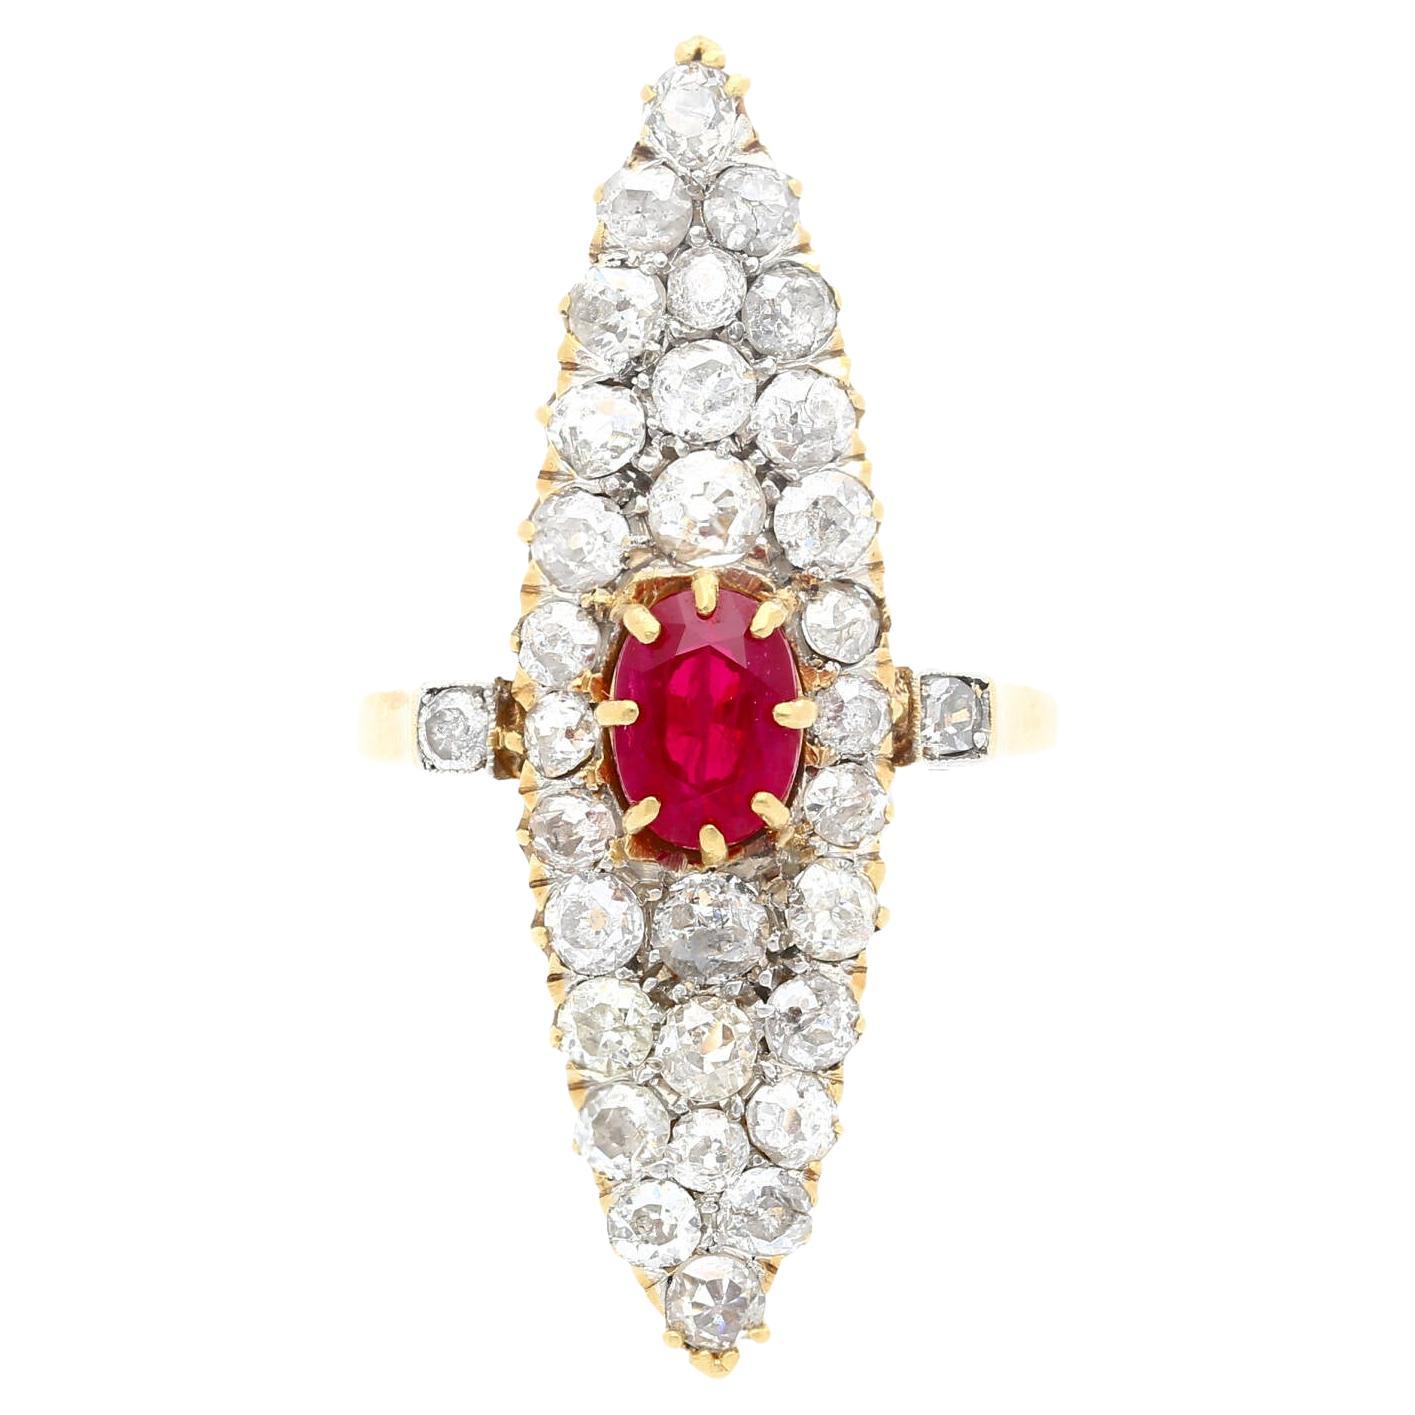 This unique 14K yellow gold old-cut cocktail ring, featuring a Ruby and Diamond design, will sit comfortably and attractively on your finger. With its intricate, vintage design, it radiates a luminous sparkle that will surely be the center of